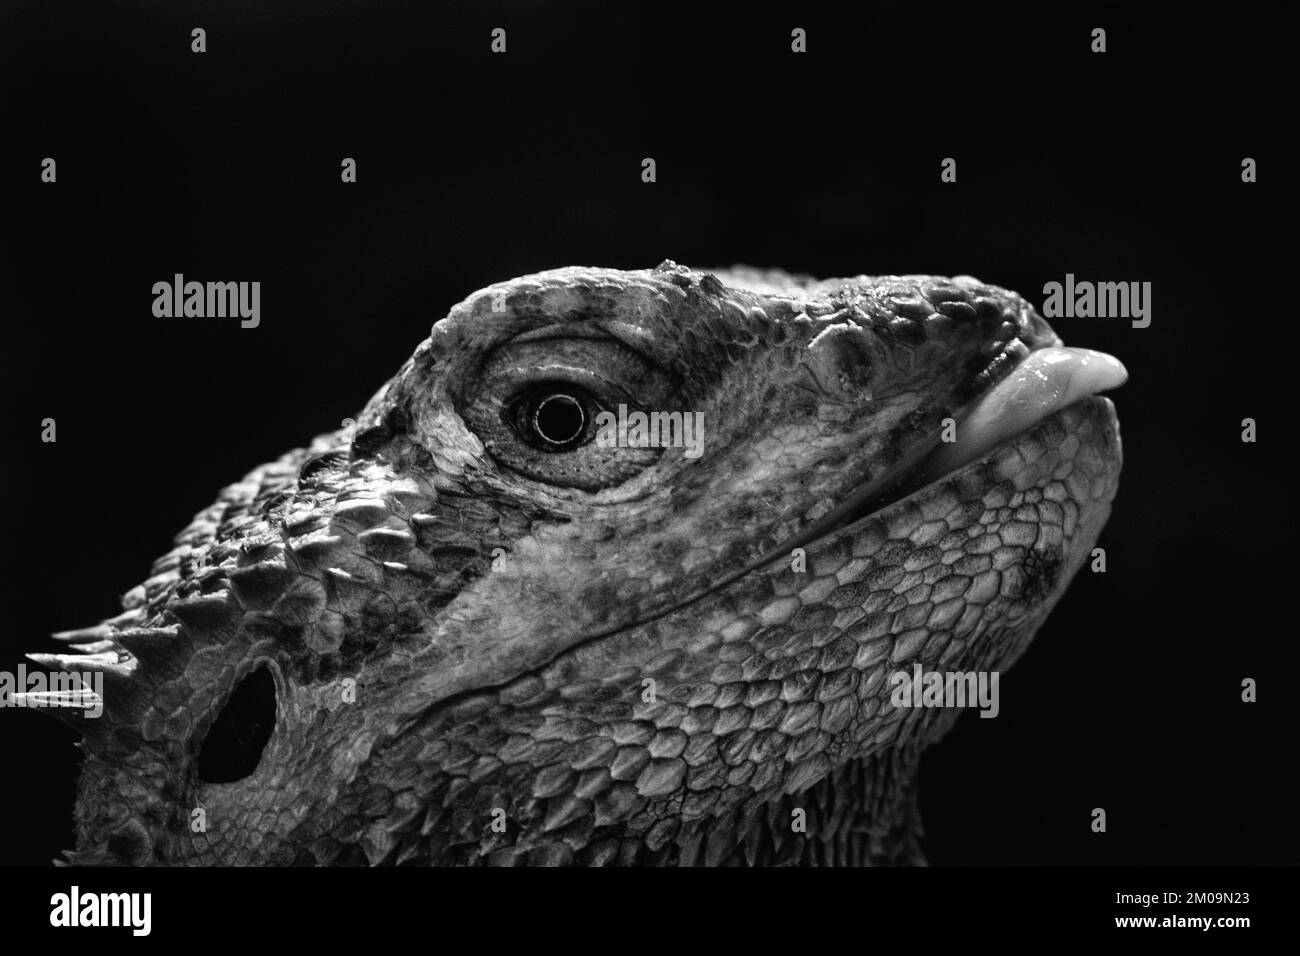 black and white close up of a bearded dragon sticking its tongue out Stock Photo